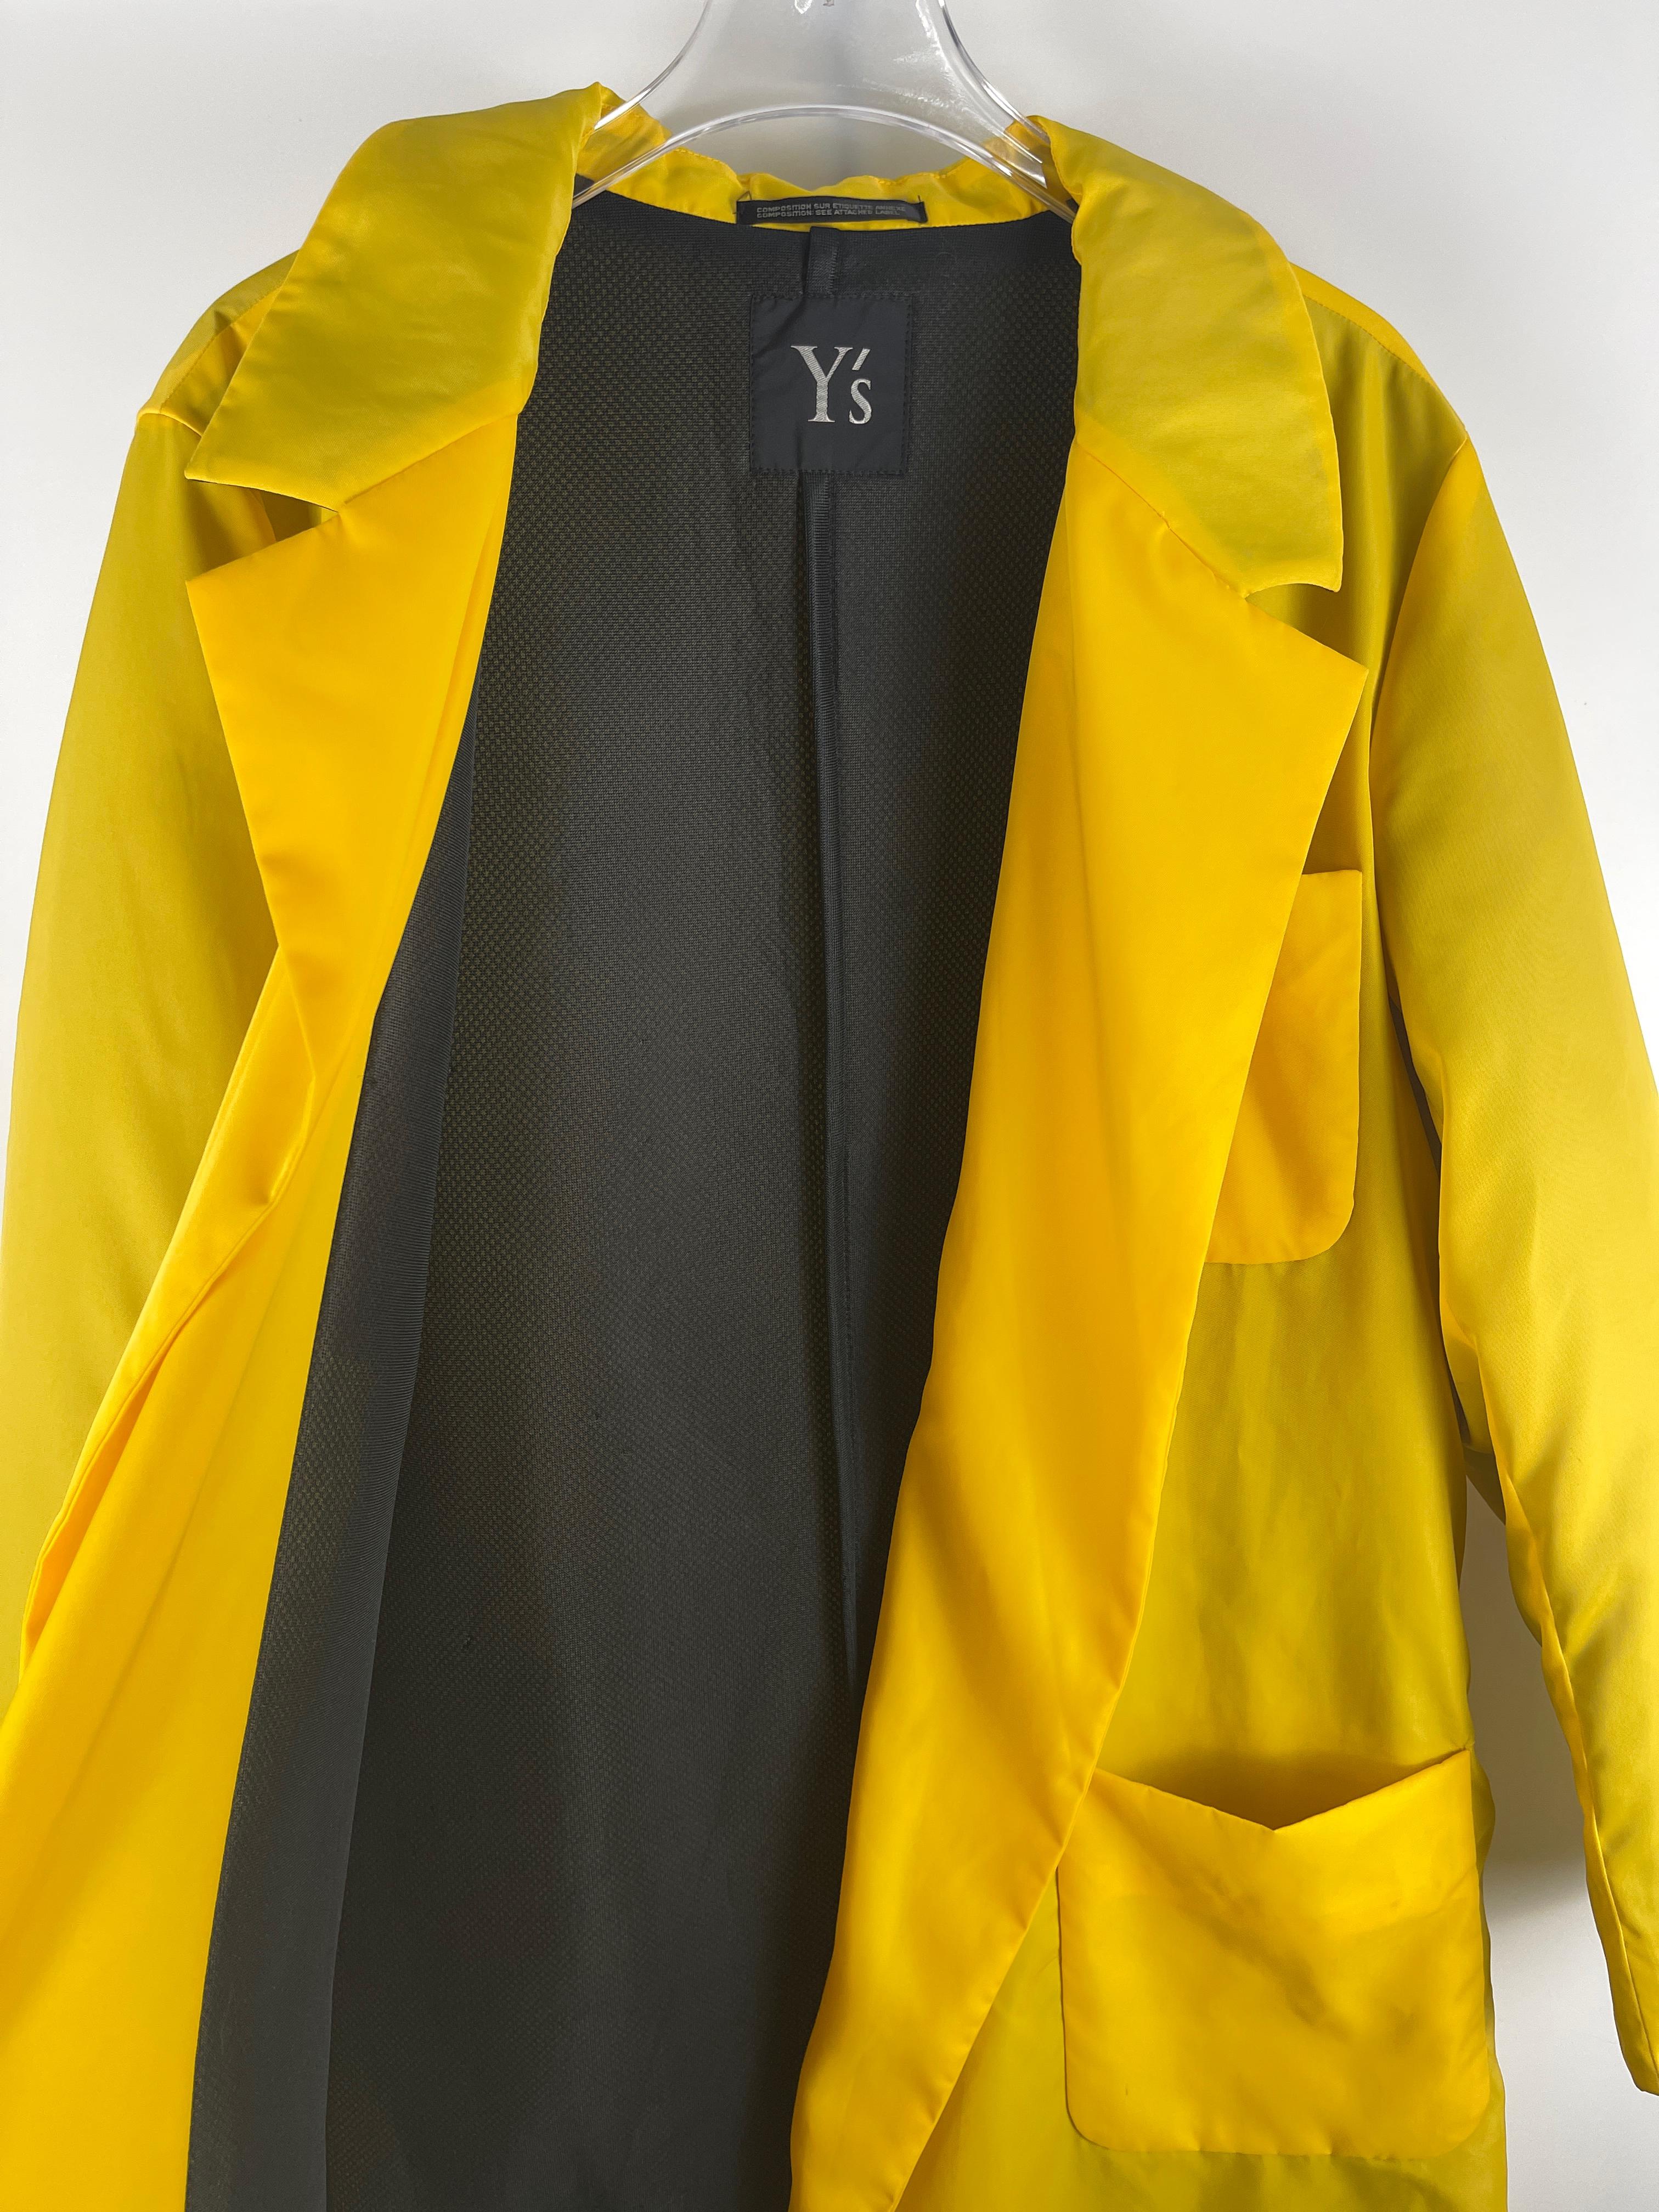 Y's Yellow Puffer Trench Coat For Sale 2